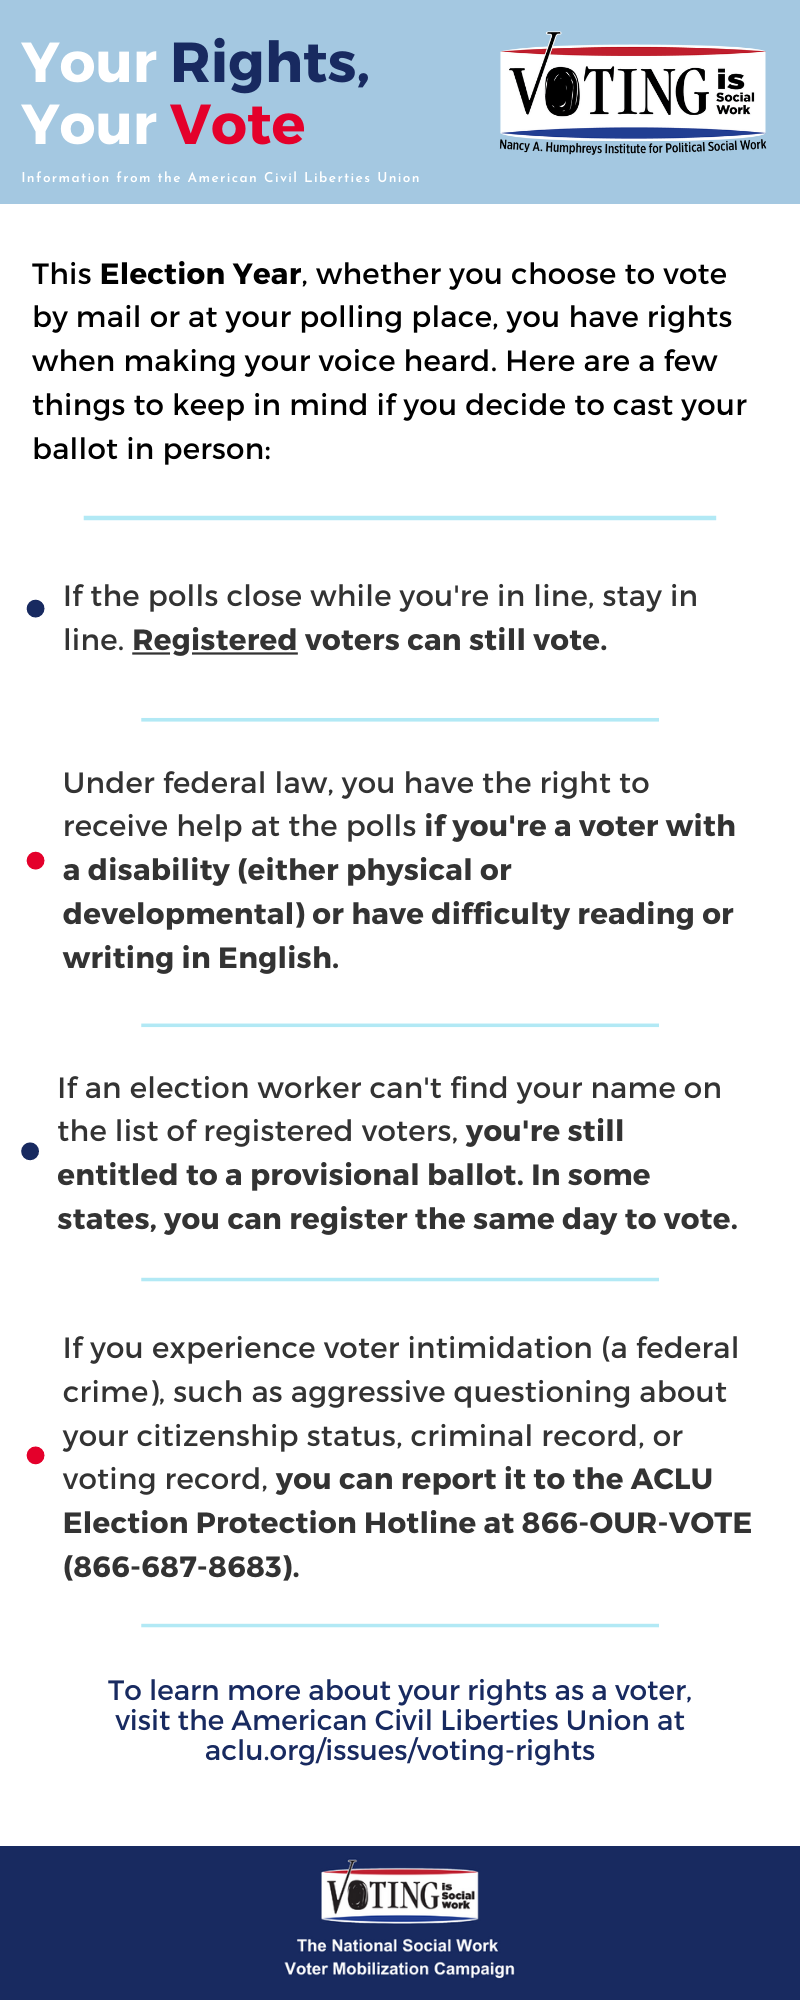 Your Rights, Your Vote Website v2